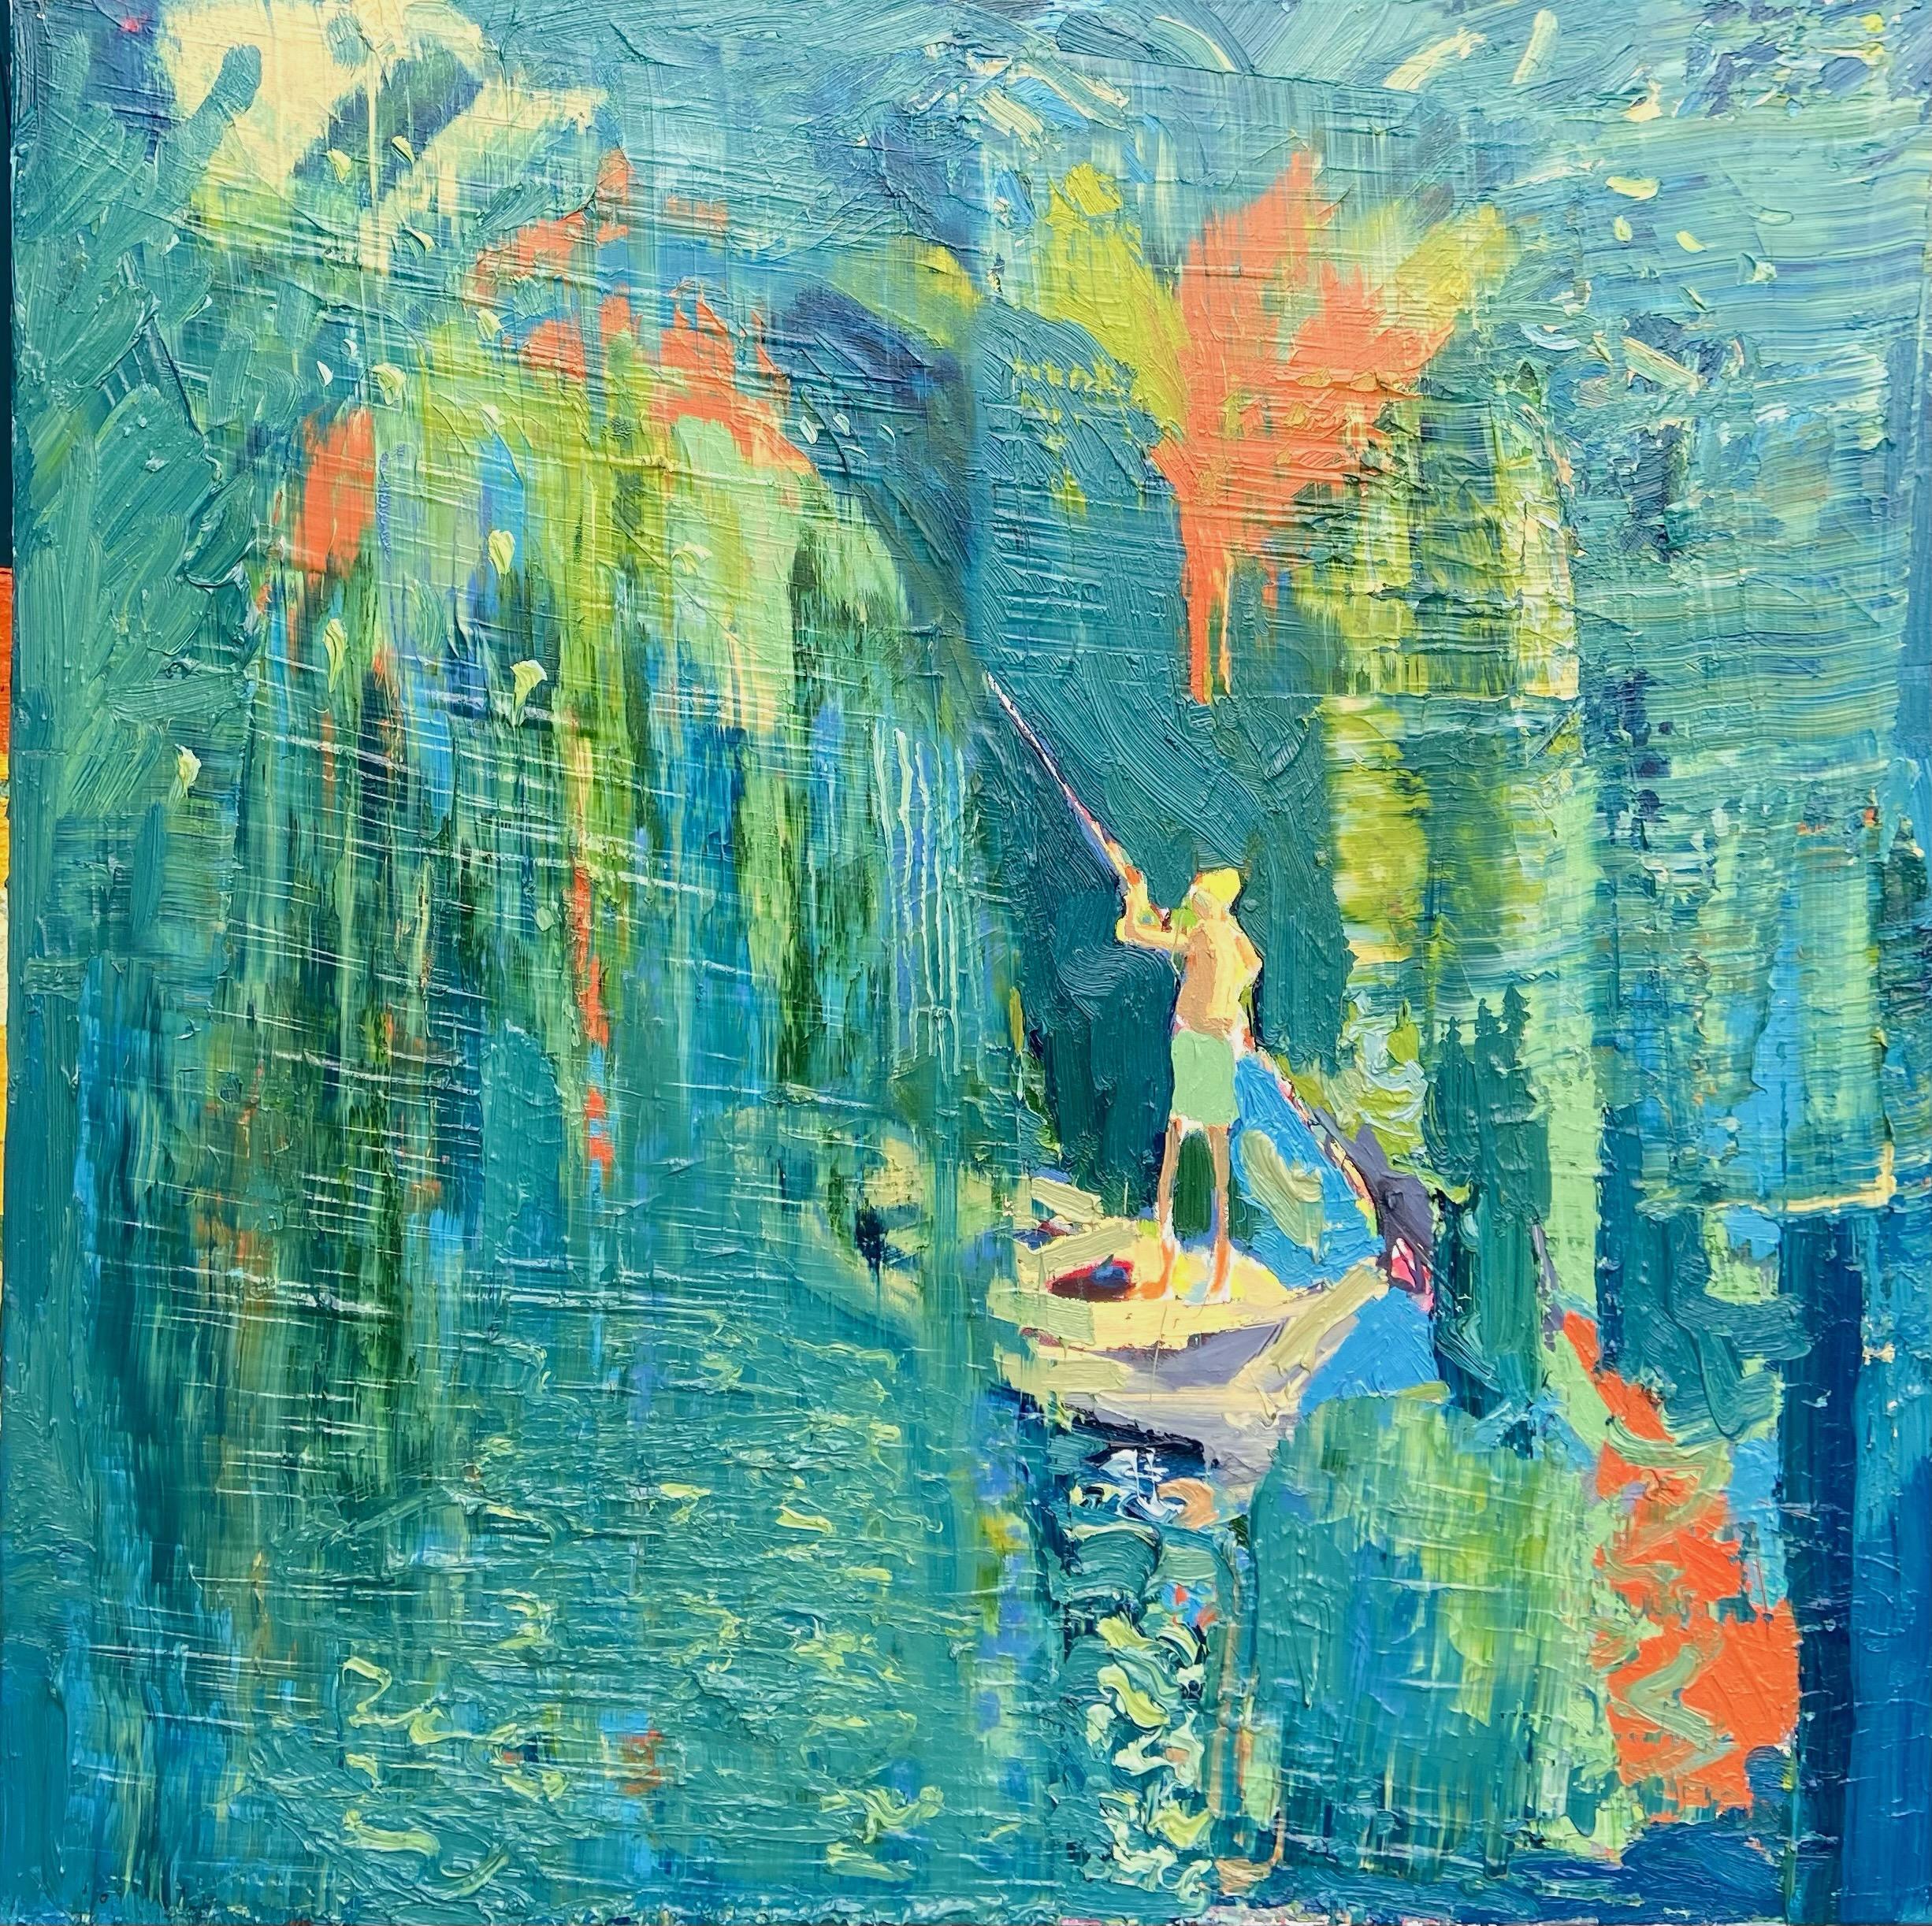 Paul wadsworth Animal Painting - Paddling By The Waterfall. Large Abstract Expressionist Oil Painting